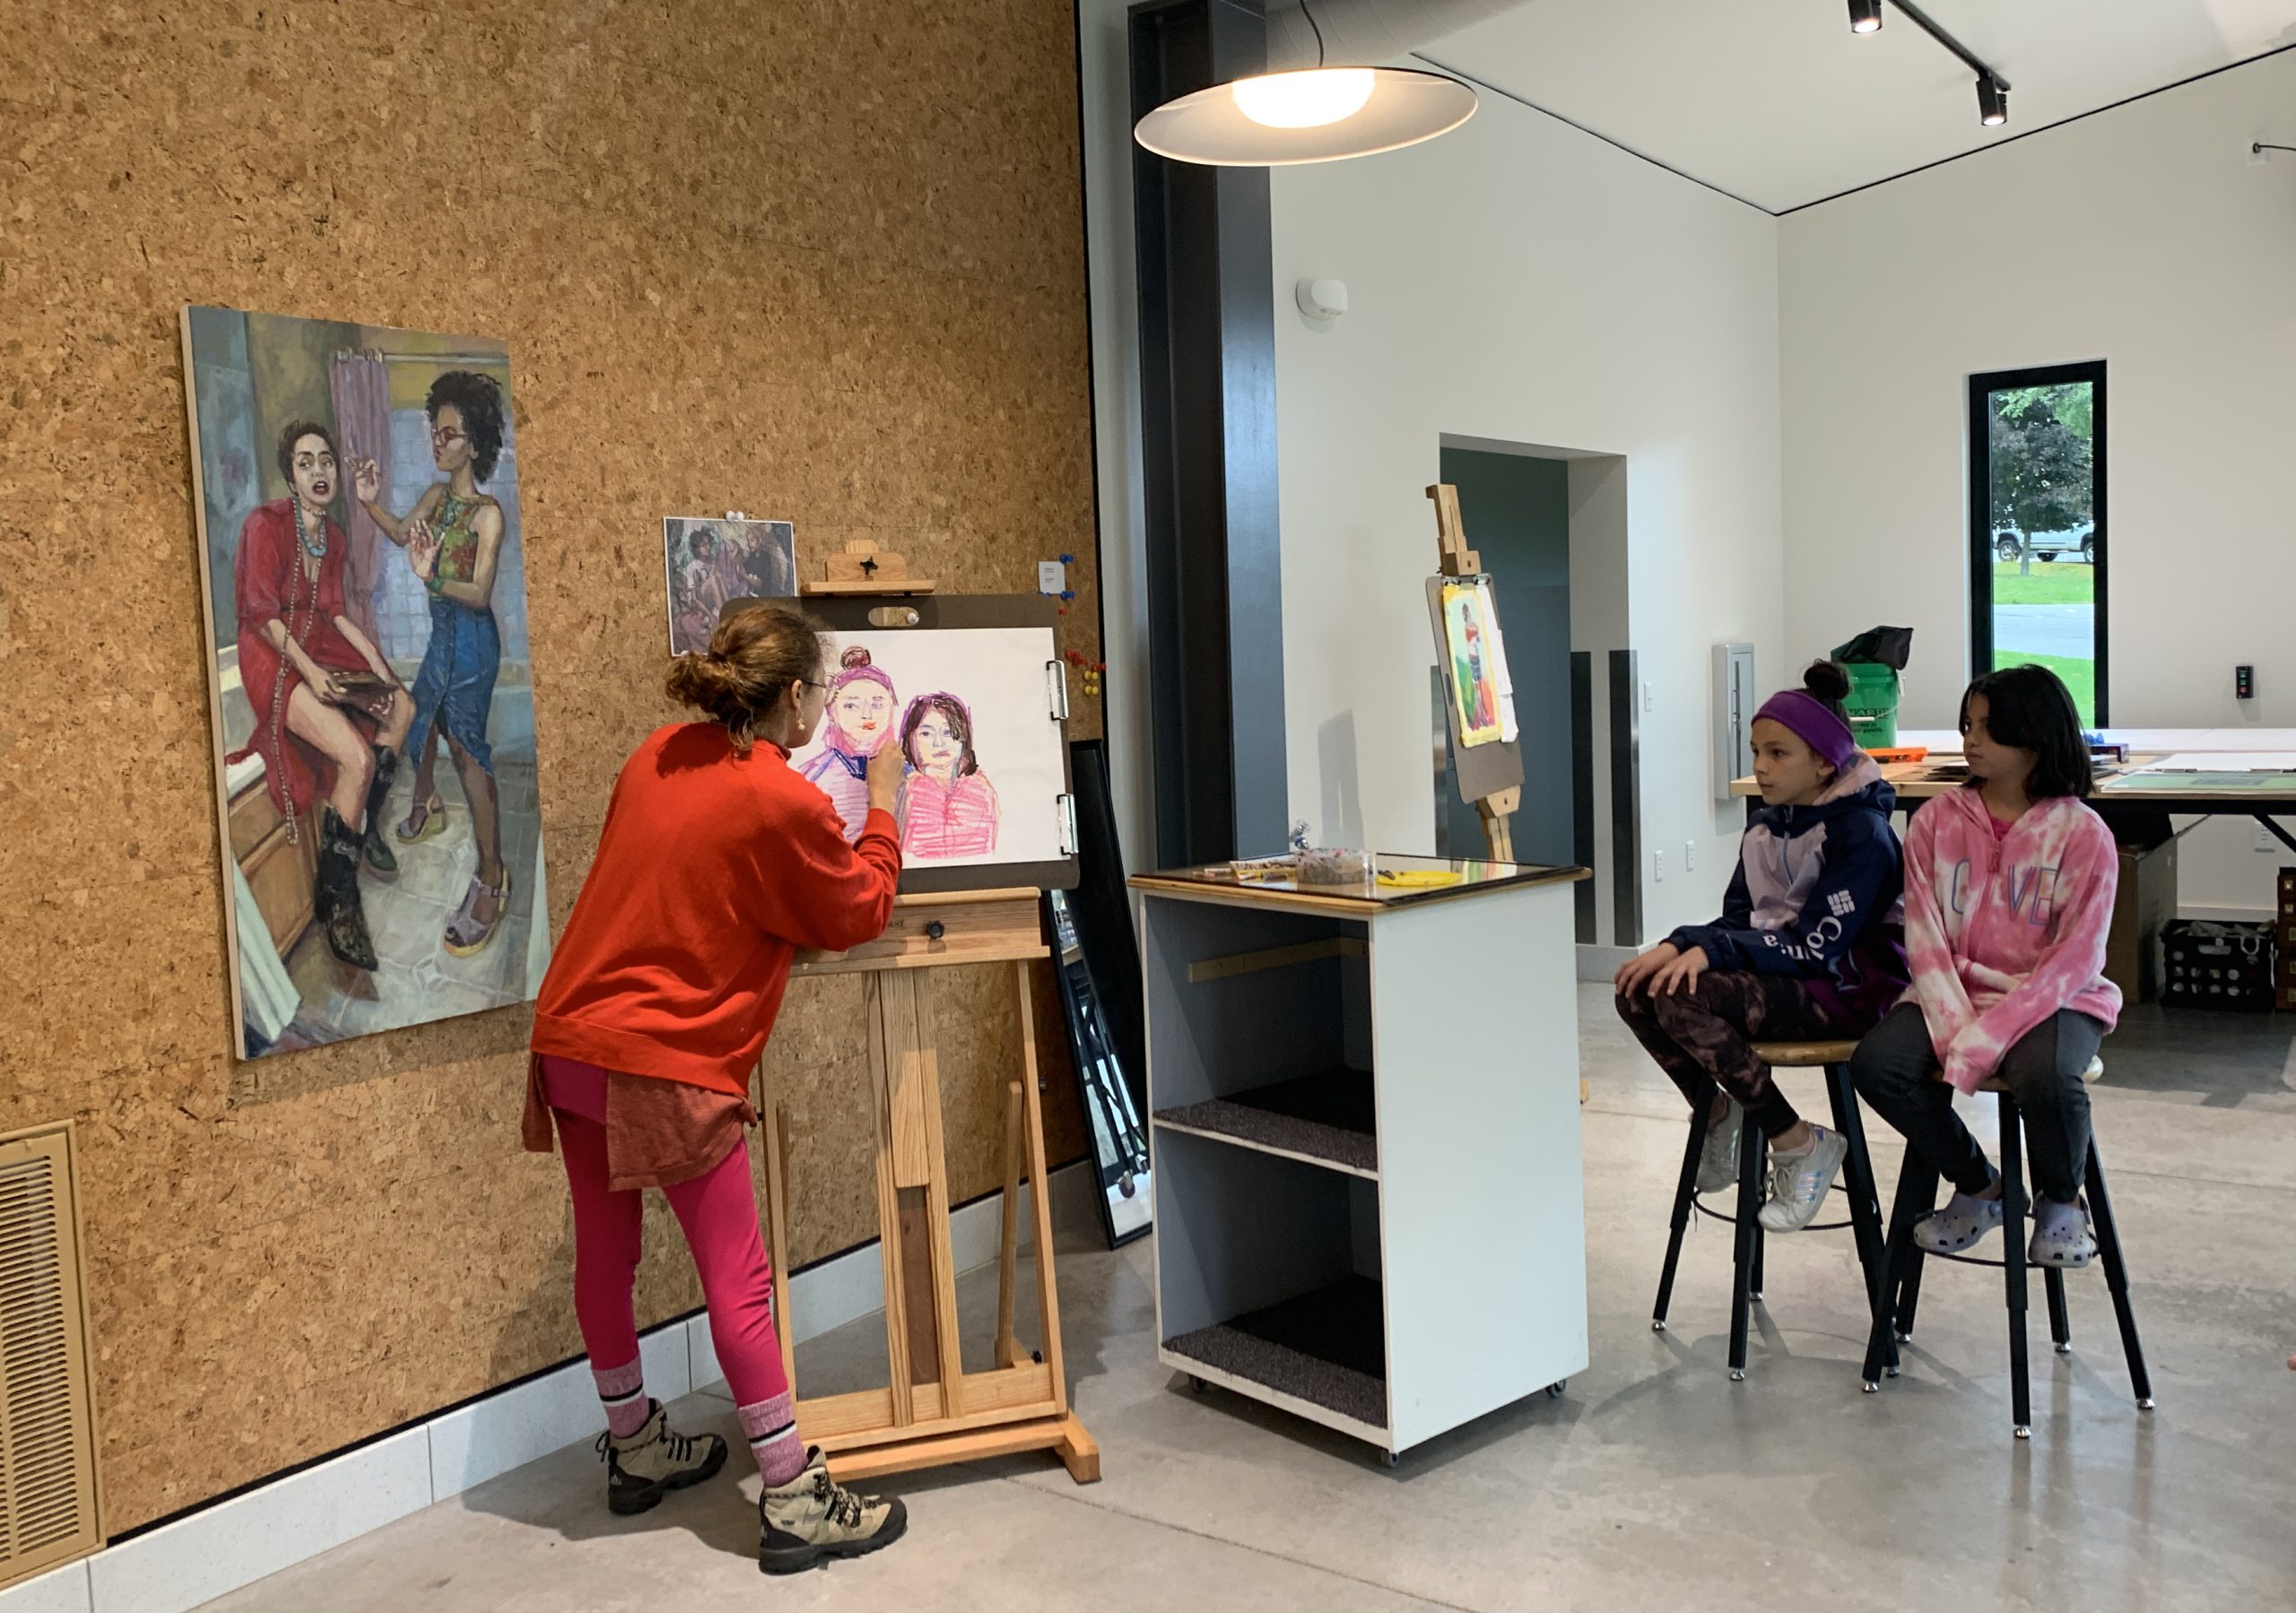 Two students sit on stools on the right side of the image. Beside them, is Ariana Vaeth, October Artist in Residence, dressed in all red. She is creating a drawing of the students using oil pastels and an easel in the Museum's Glass Box Studio. The drawing is made up of pinks, purples, and flesh tones.